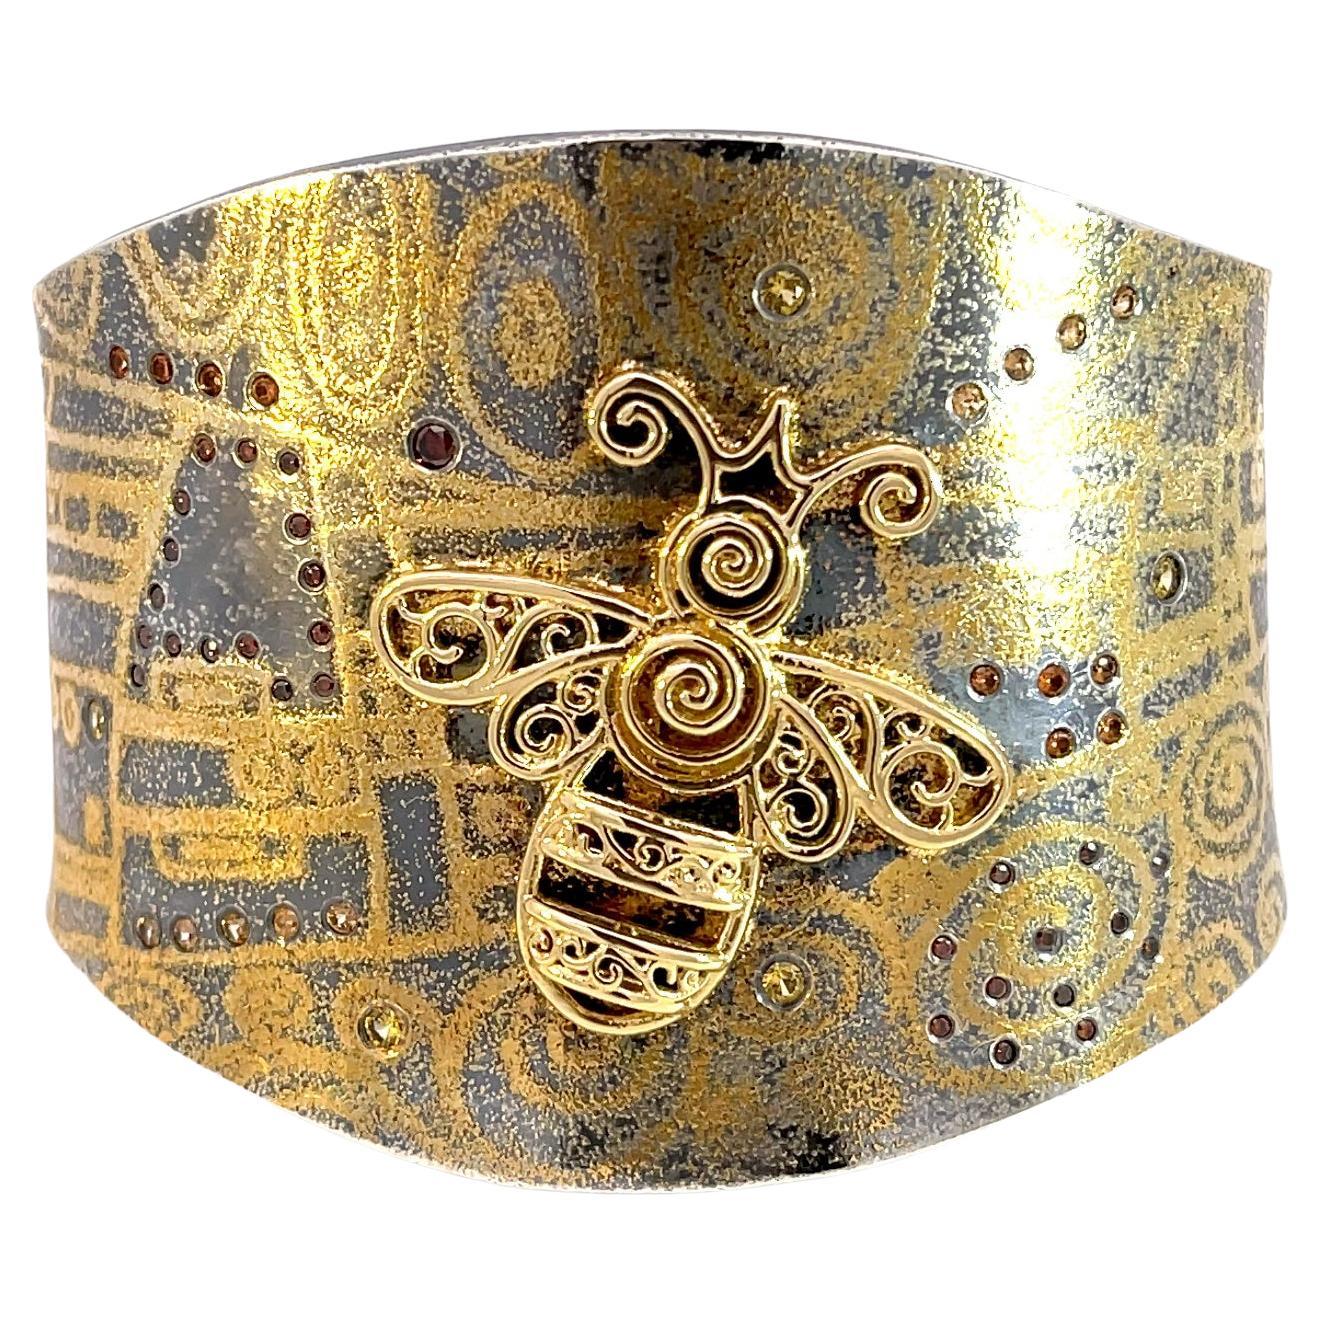 "Bee Klimt" Cuff Bracelet with Sterling Silver, 18Karat Yellow Gold and 24K Gold For Sale